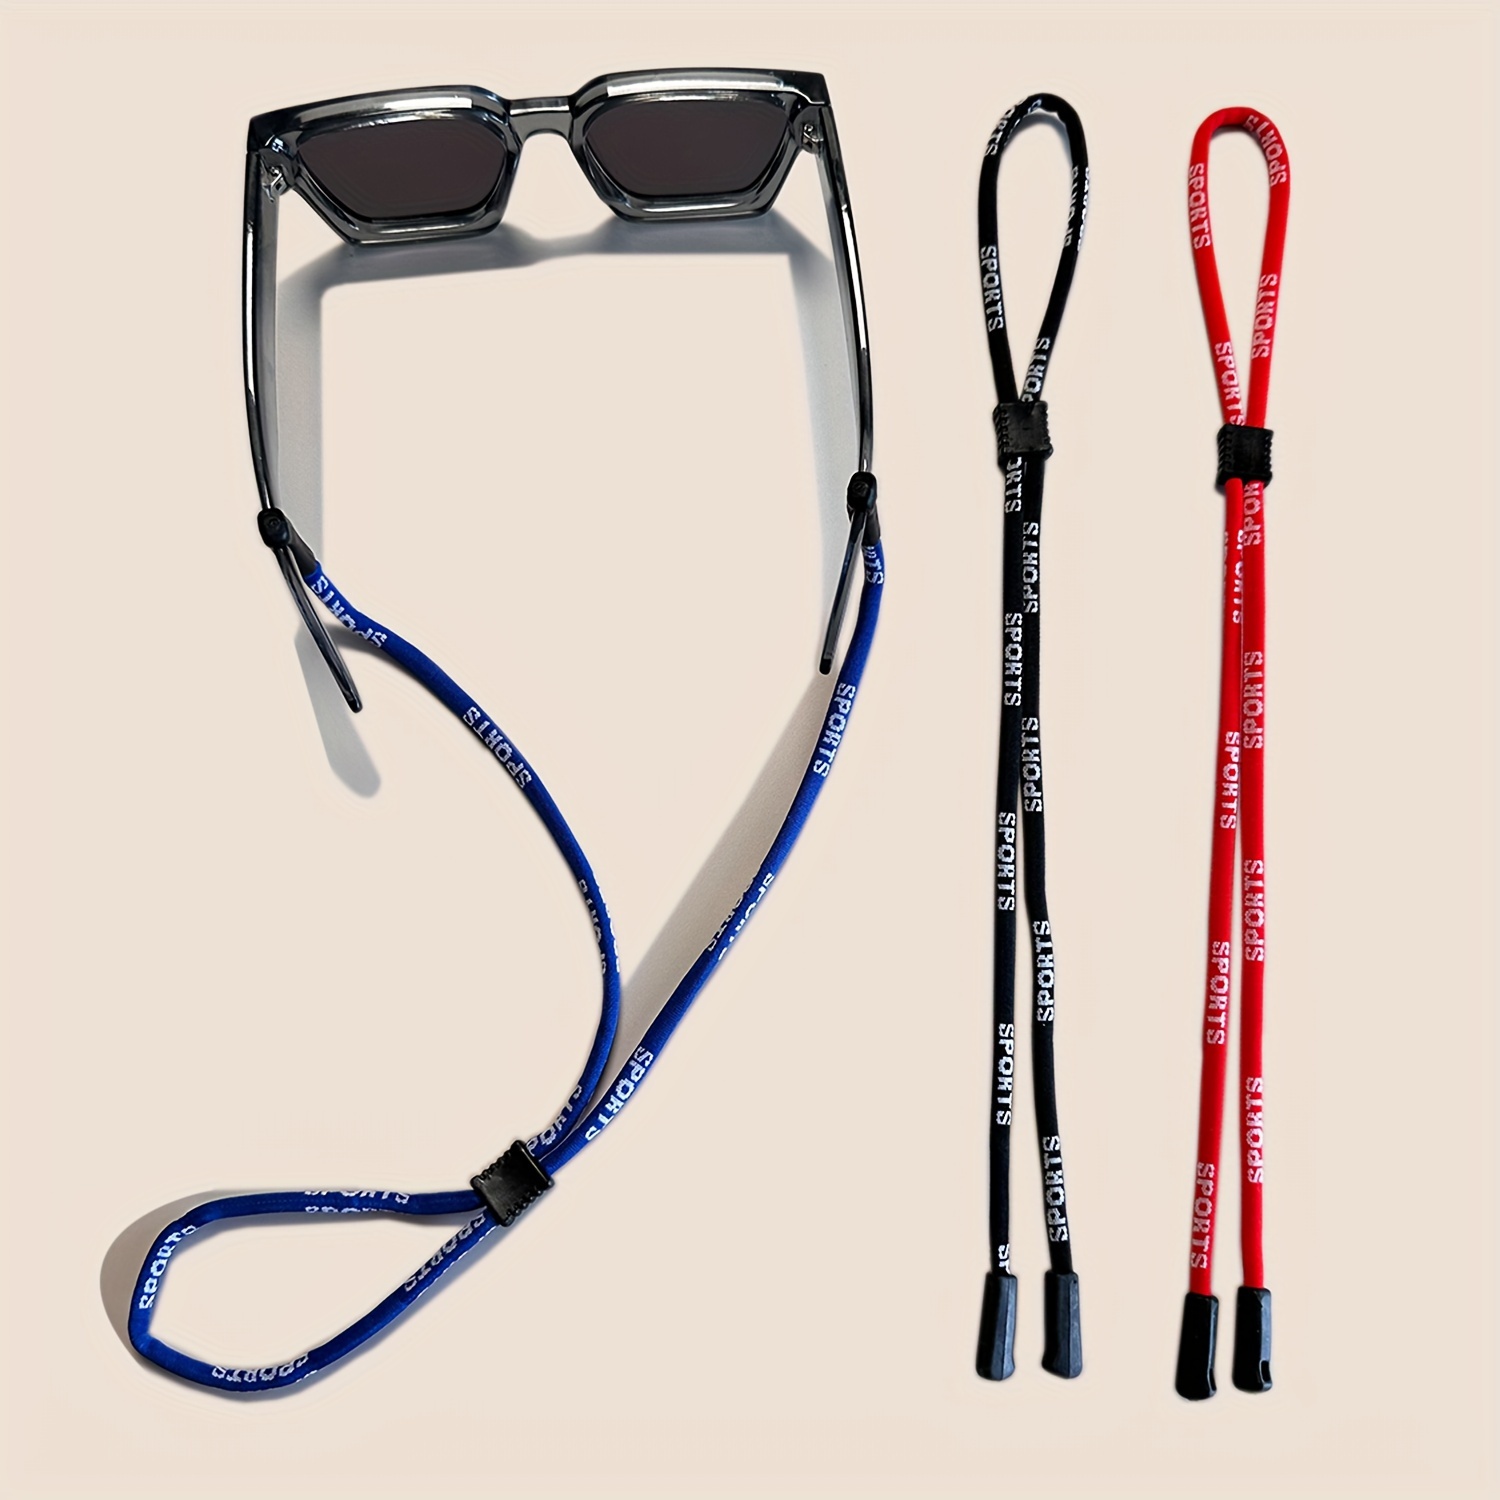 

3pcs Cool Colorful Classic Glasses Straps, Adjustable Sunglasses Lanyards, Comfortable Practical Glasses Fixers, Outdoor Sports Eyewear Retainers